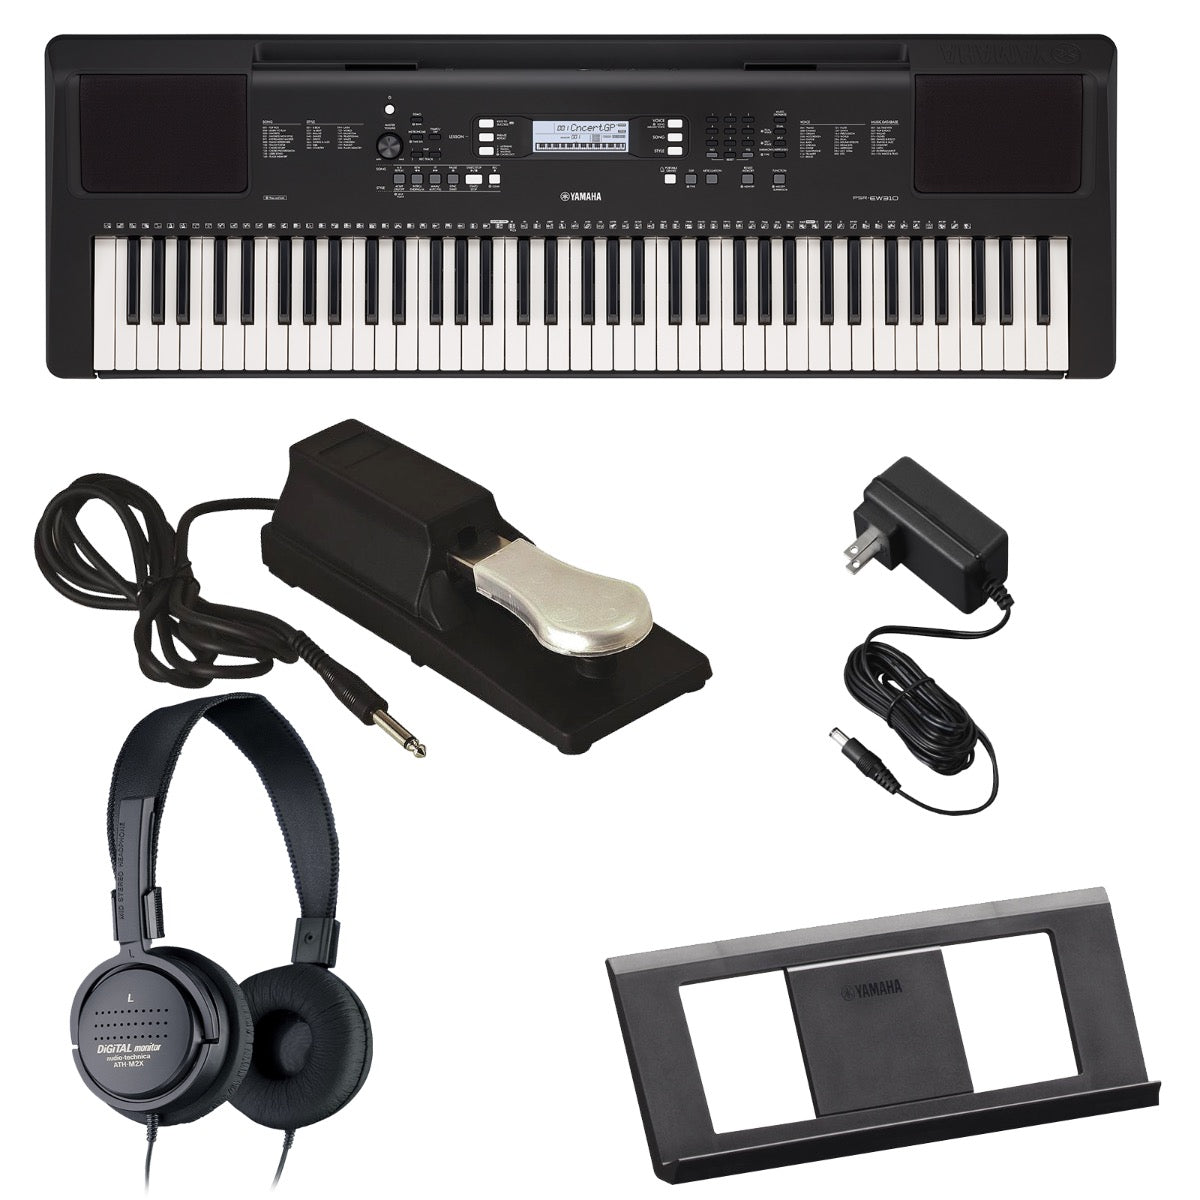 Collage of everything included with the Yamaha PSR-EW310 Portable Keyboard with Power Adapter BONUS PAK